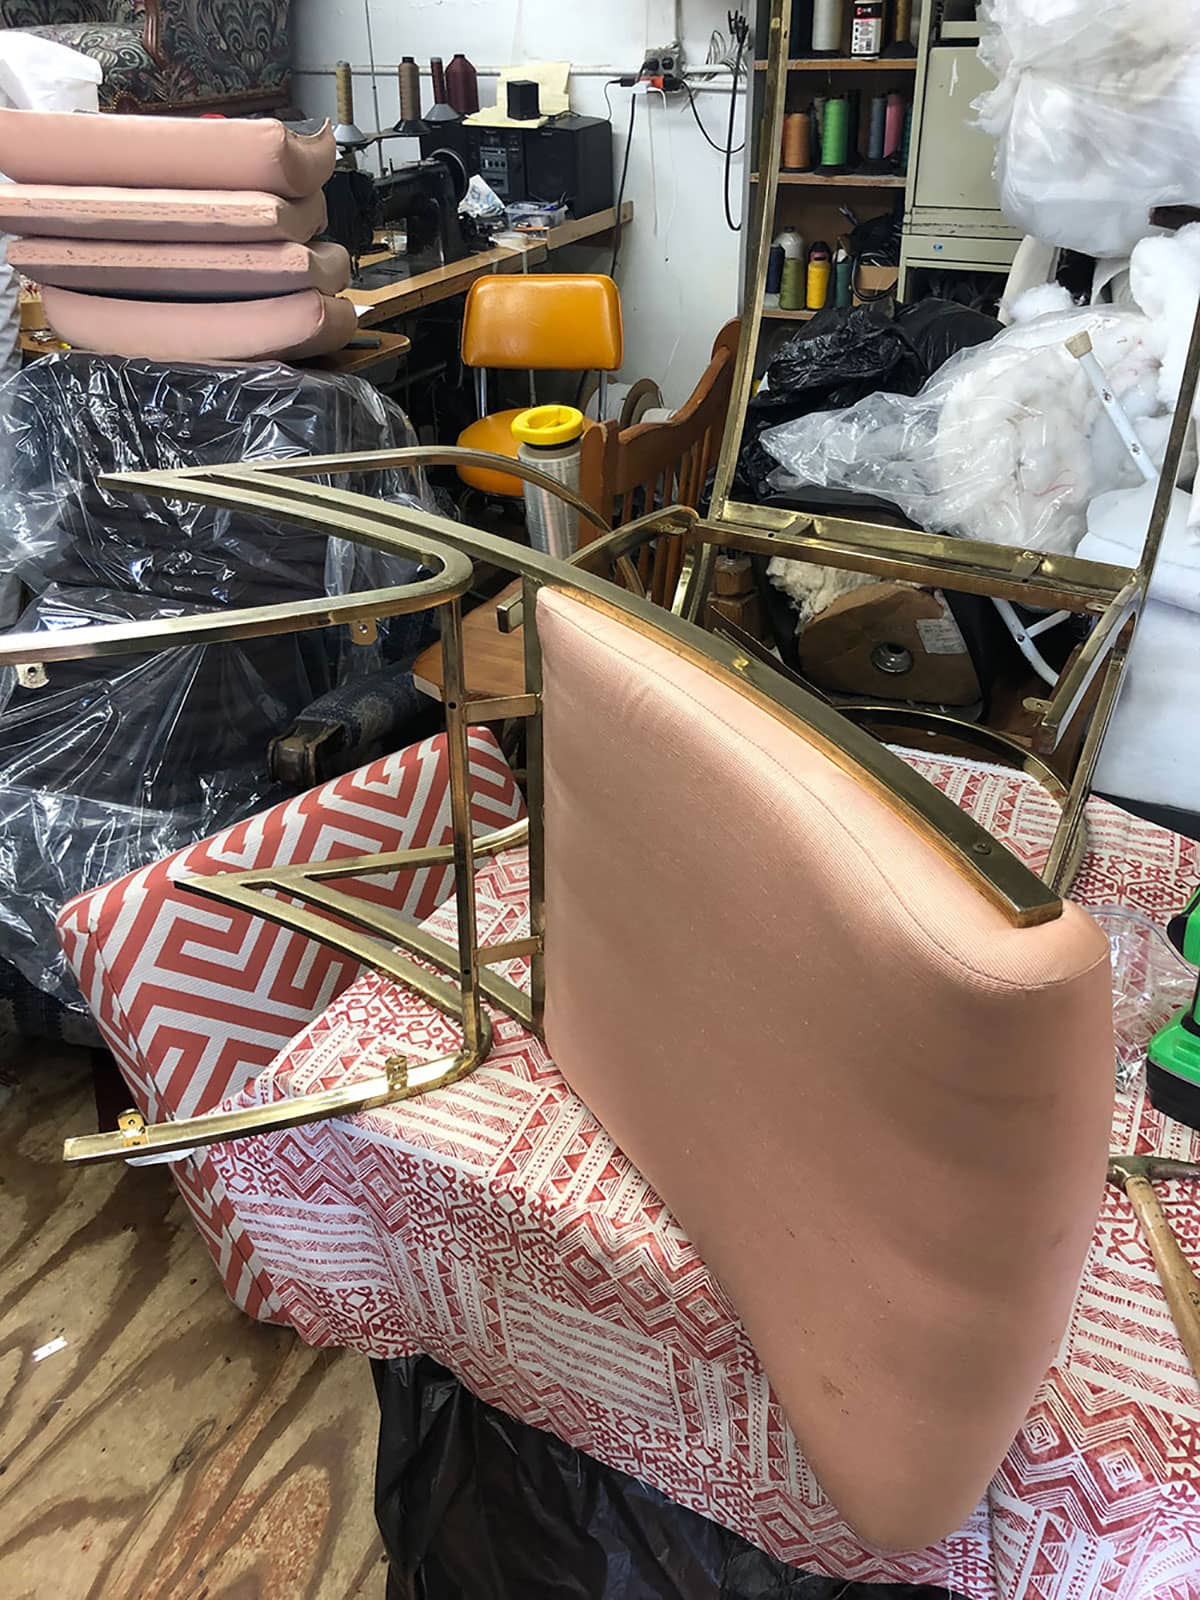 Original brass cantilever chairs in pink by Pierre Cardin at the upholstery shop, ready to be covered in Ultrasuede performance fabric in green